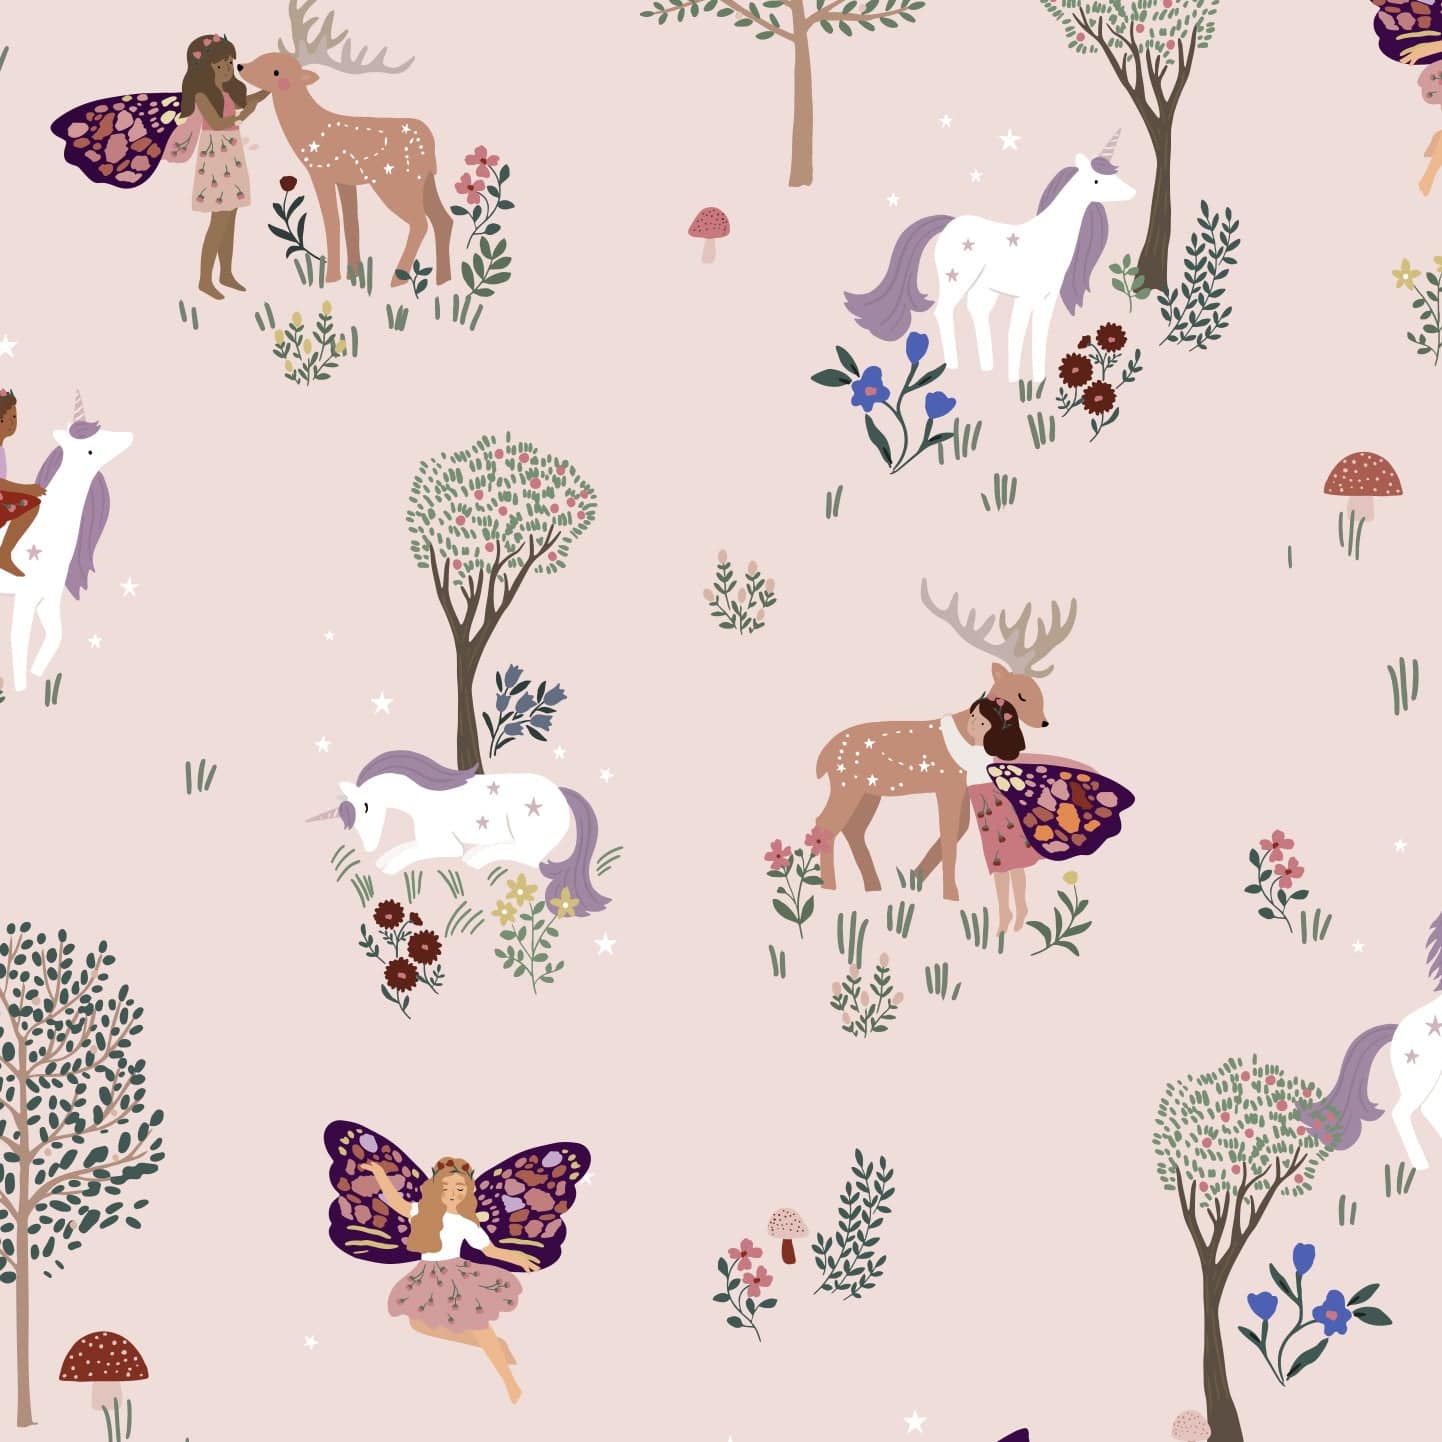 Wallpaper sample of a magical forest with white and purple unicorns, red and white toadstools, brown deers and delicate fairies. Flowers and trees with a pink background.